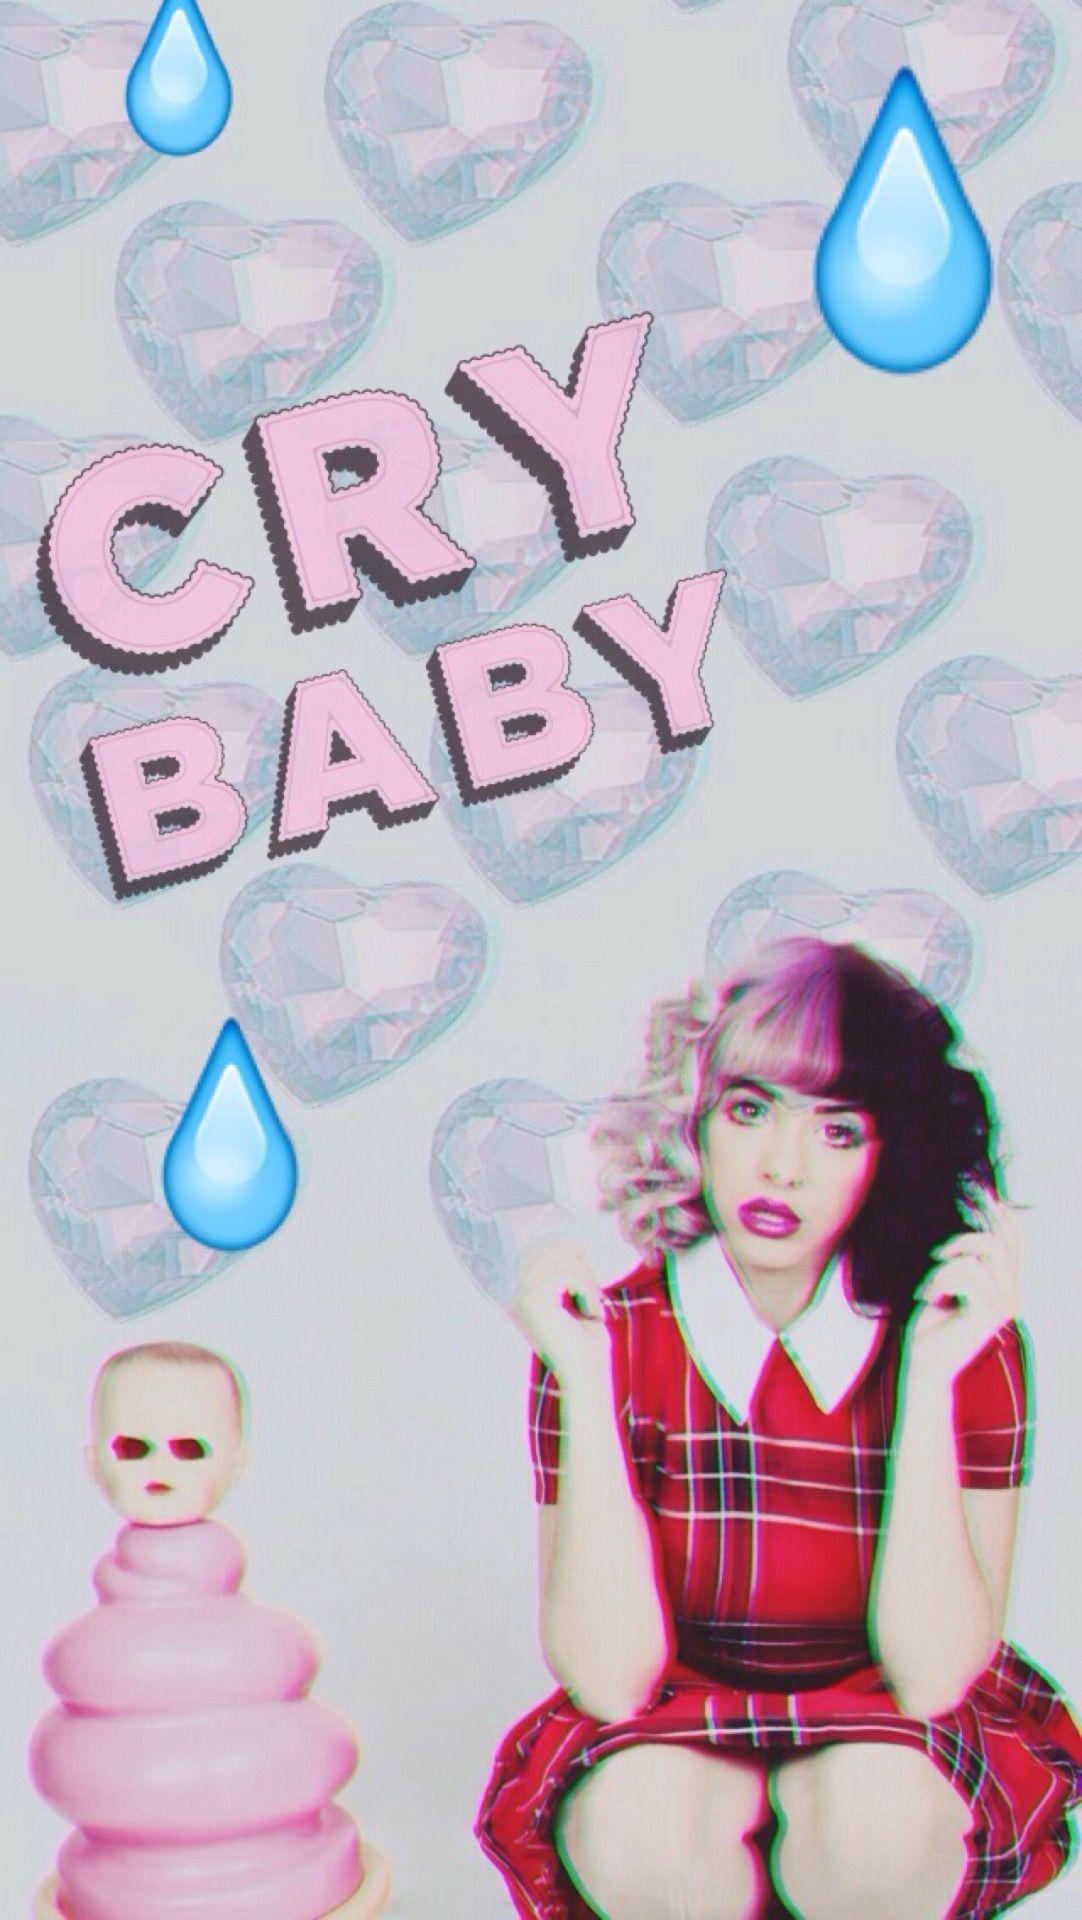 Cry Baby Wallpapers - Wallpaper Cave1082 x 1920